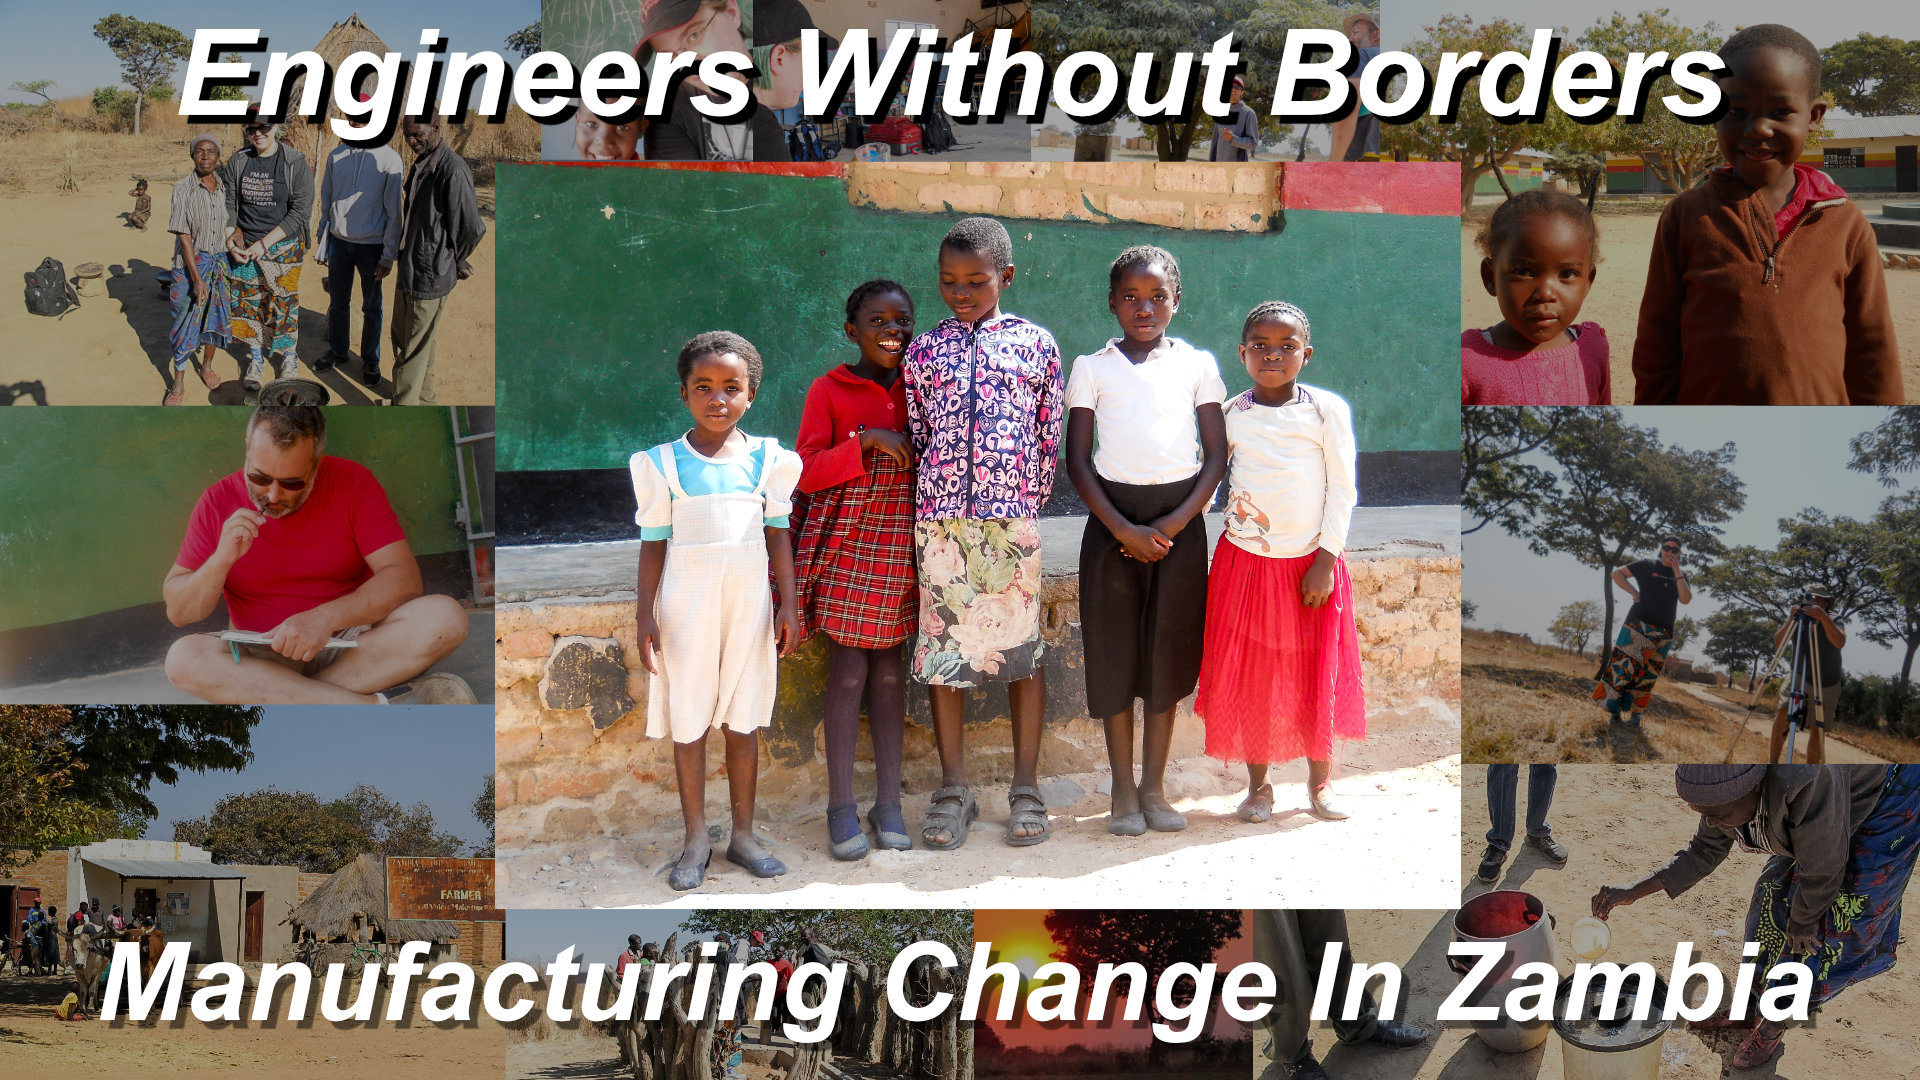 Manufacturing Change in Zambia